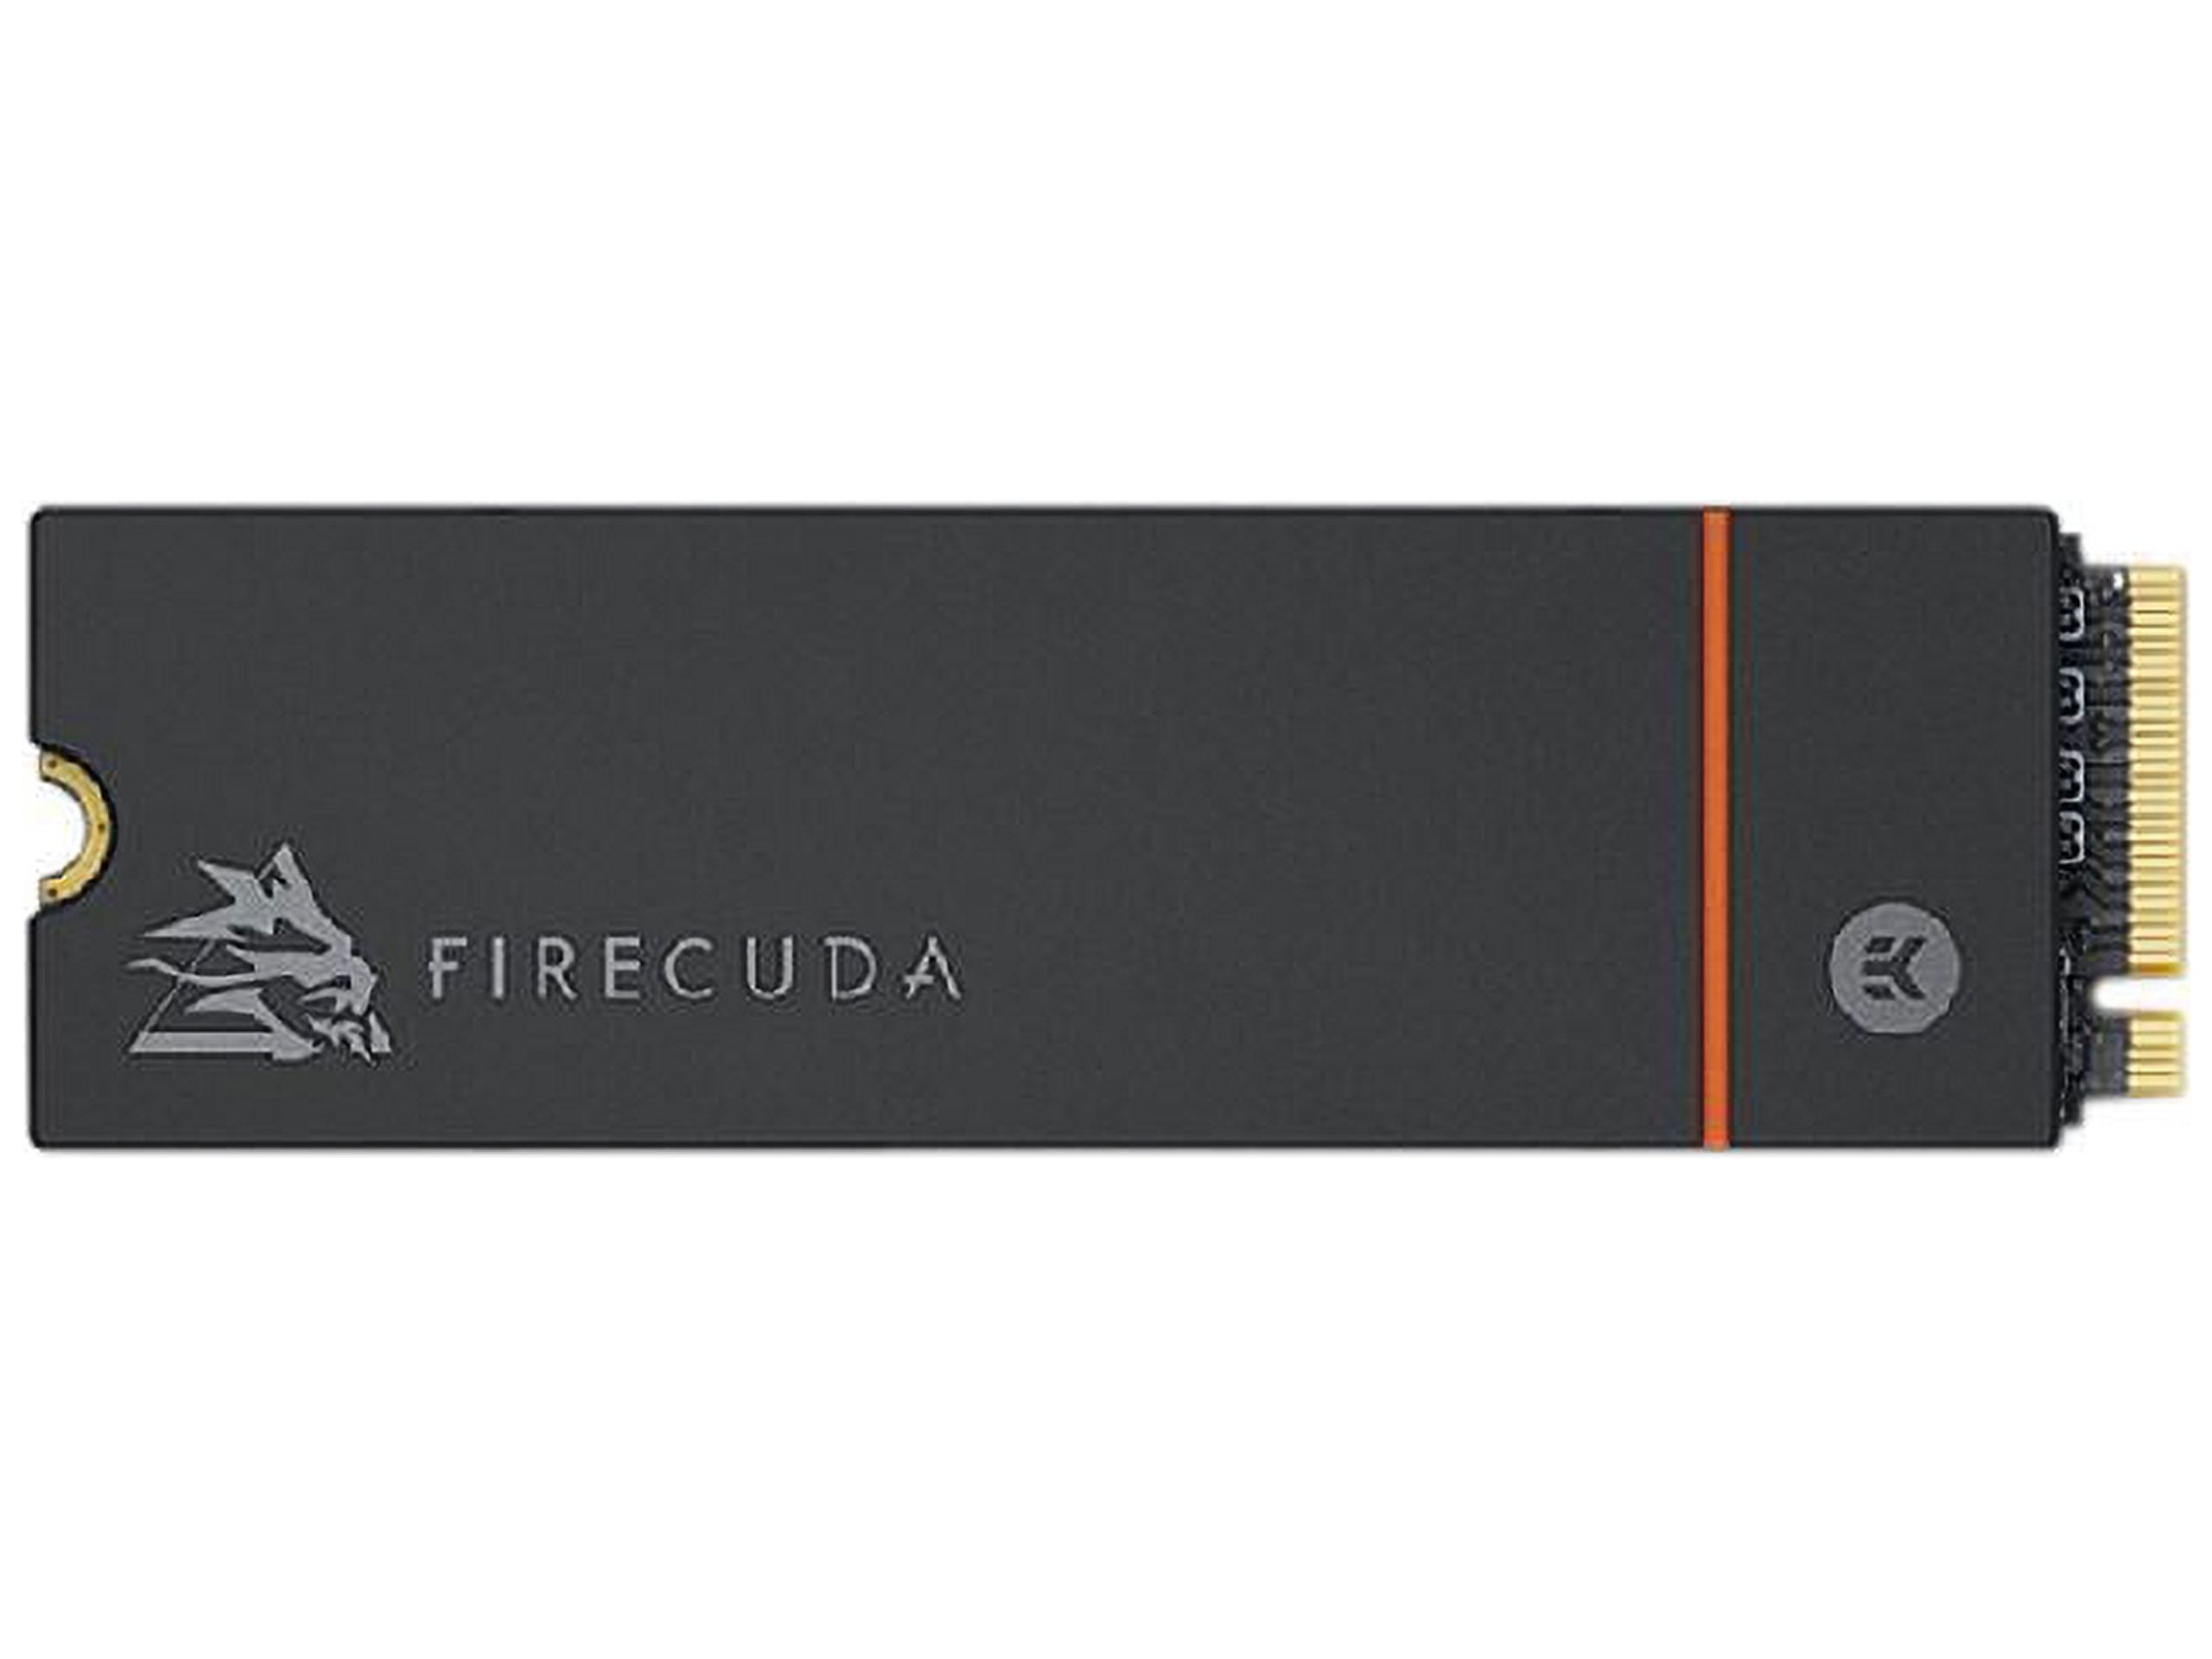 Seagate FireCuda 530 M.2 2280 4TB PCIe Gen4 x4 NVMe 1.4 3D NAND Internal Solid State Drive (SSD) ZP4000GM3A023 - image 1 of 6